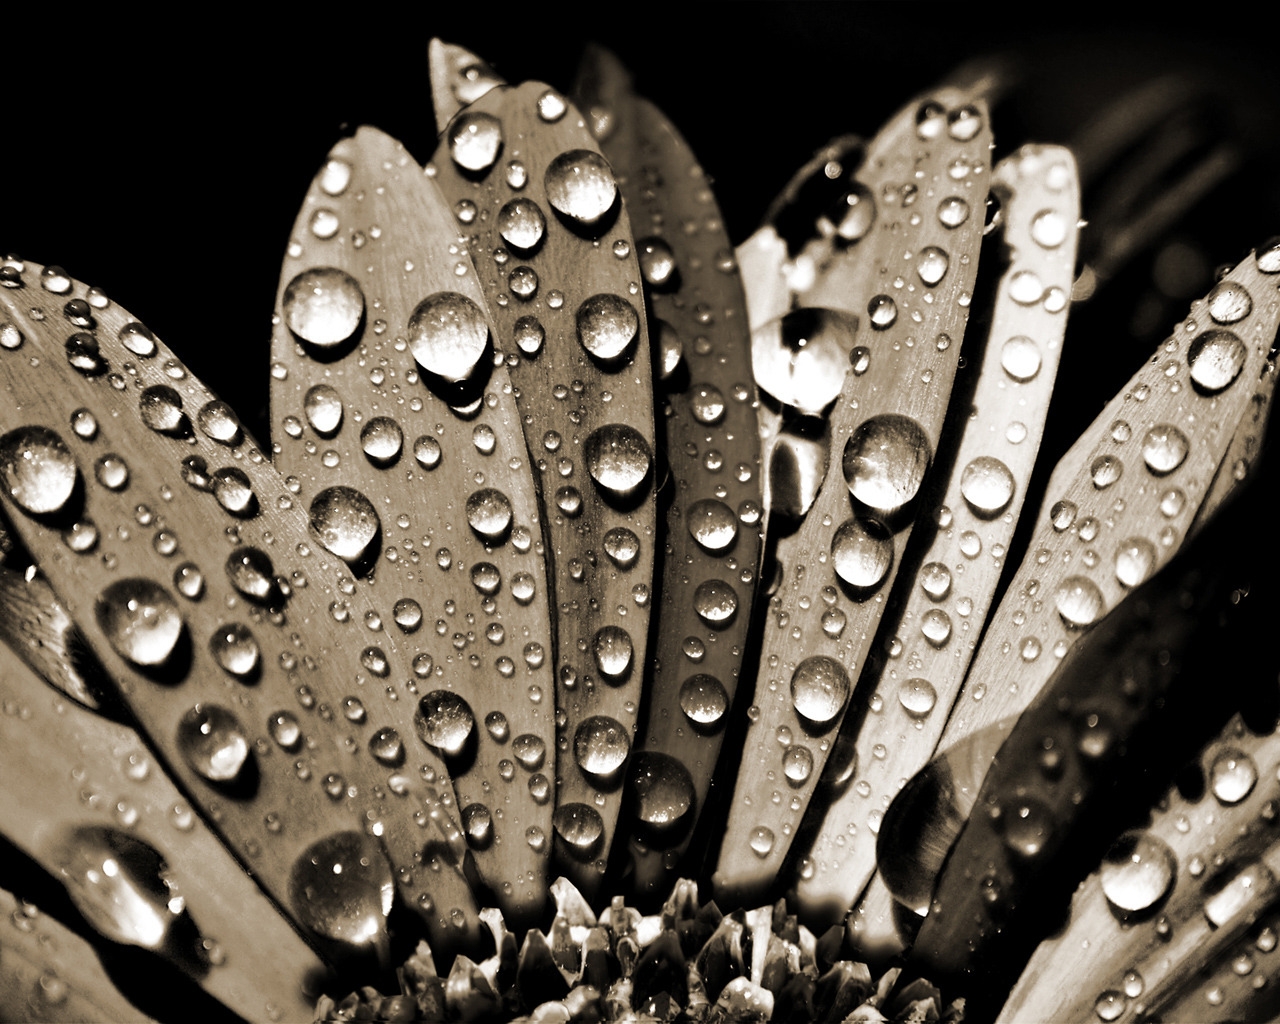 Sepia Water Drops for 1280 x 1024 resolution